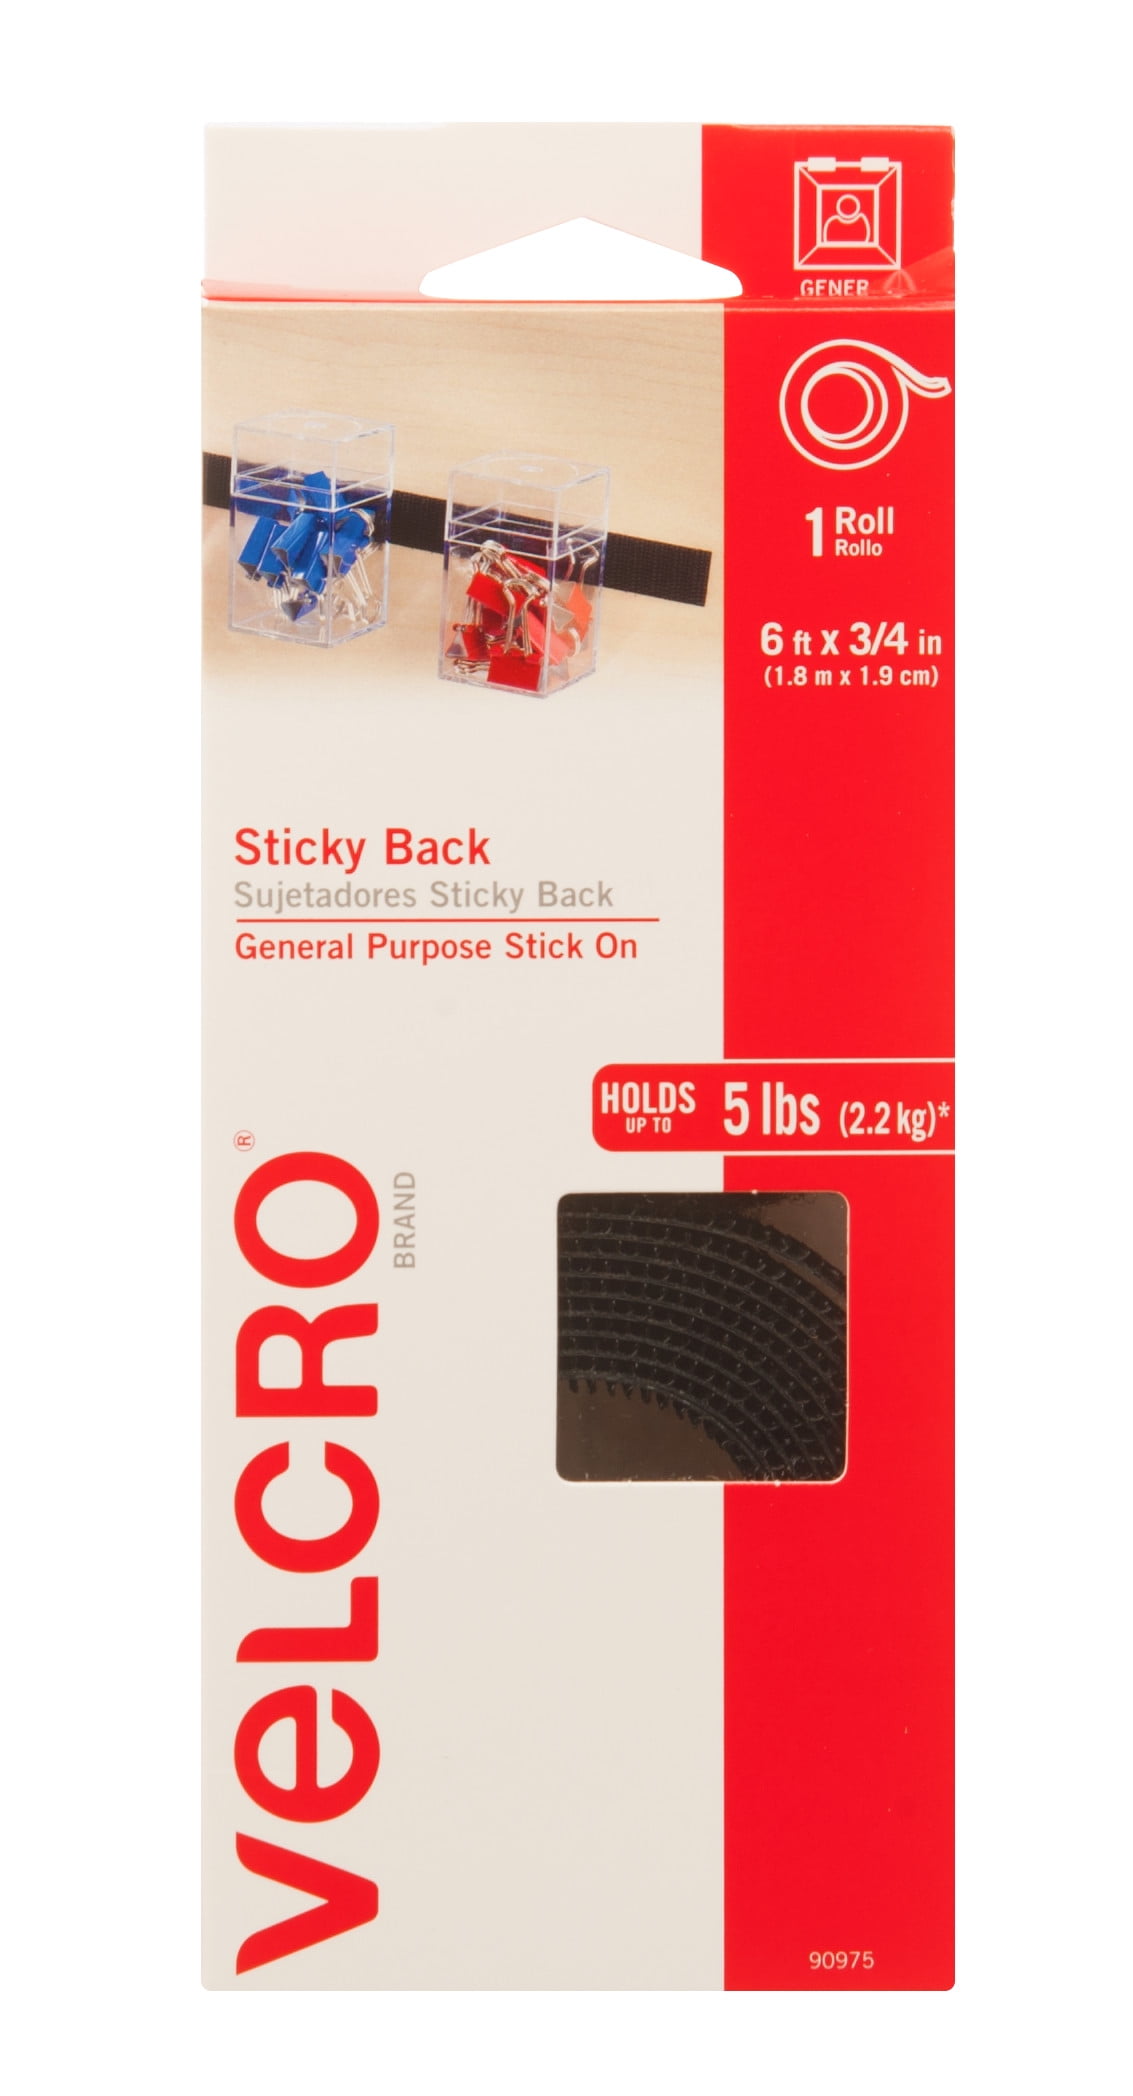 VELCRO Brand Industrial Fasteners Stick-On Adhesive, Professional Grade  Heavy Duty Strength